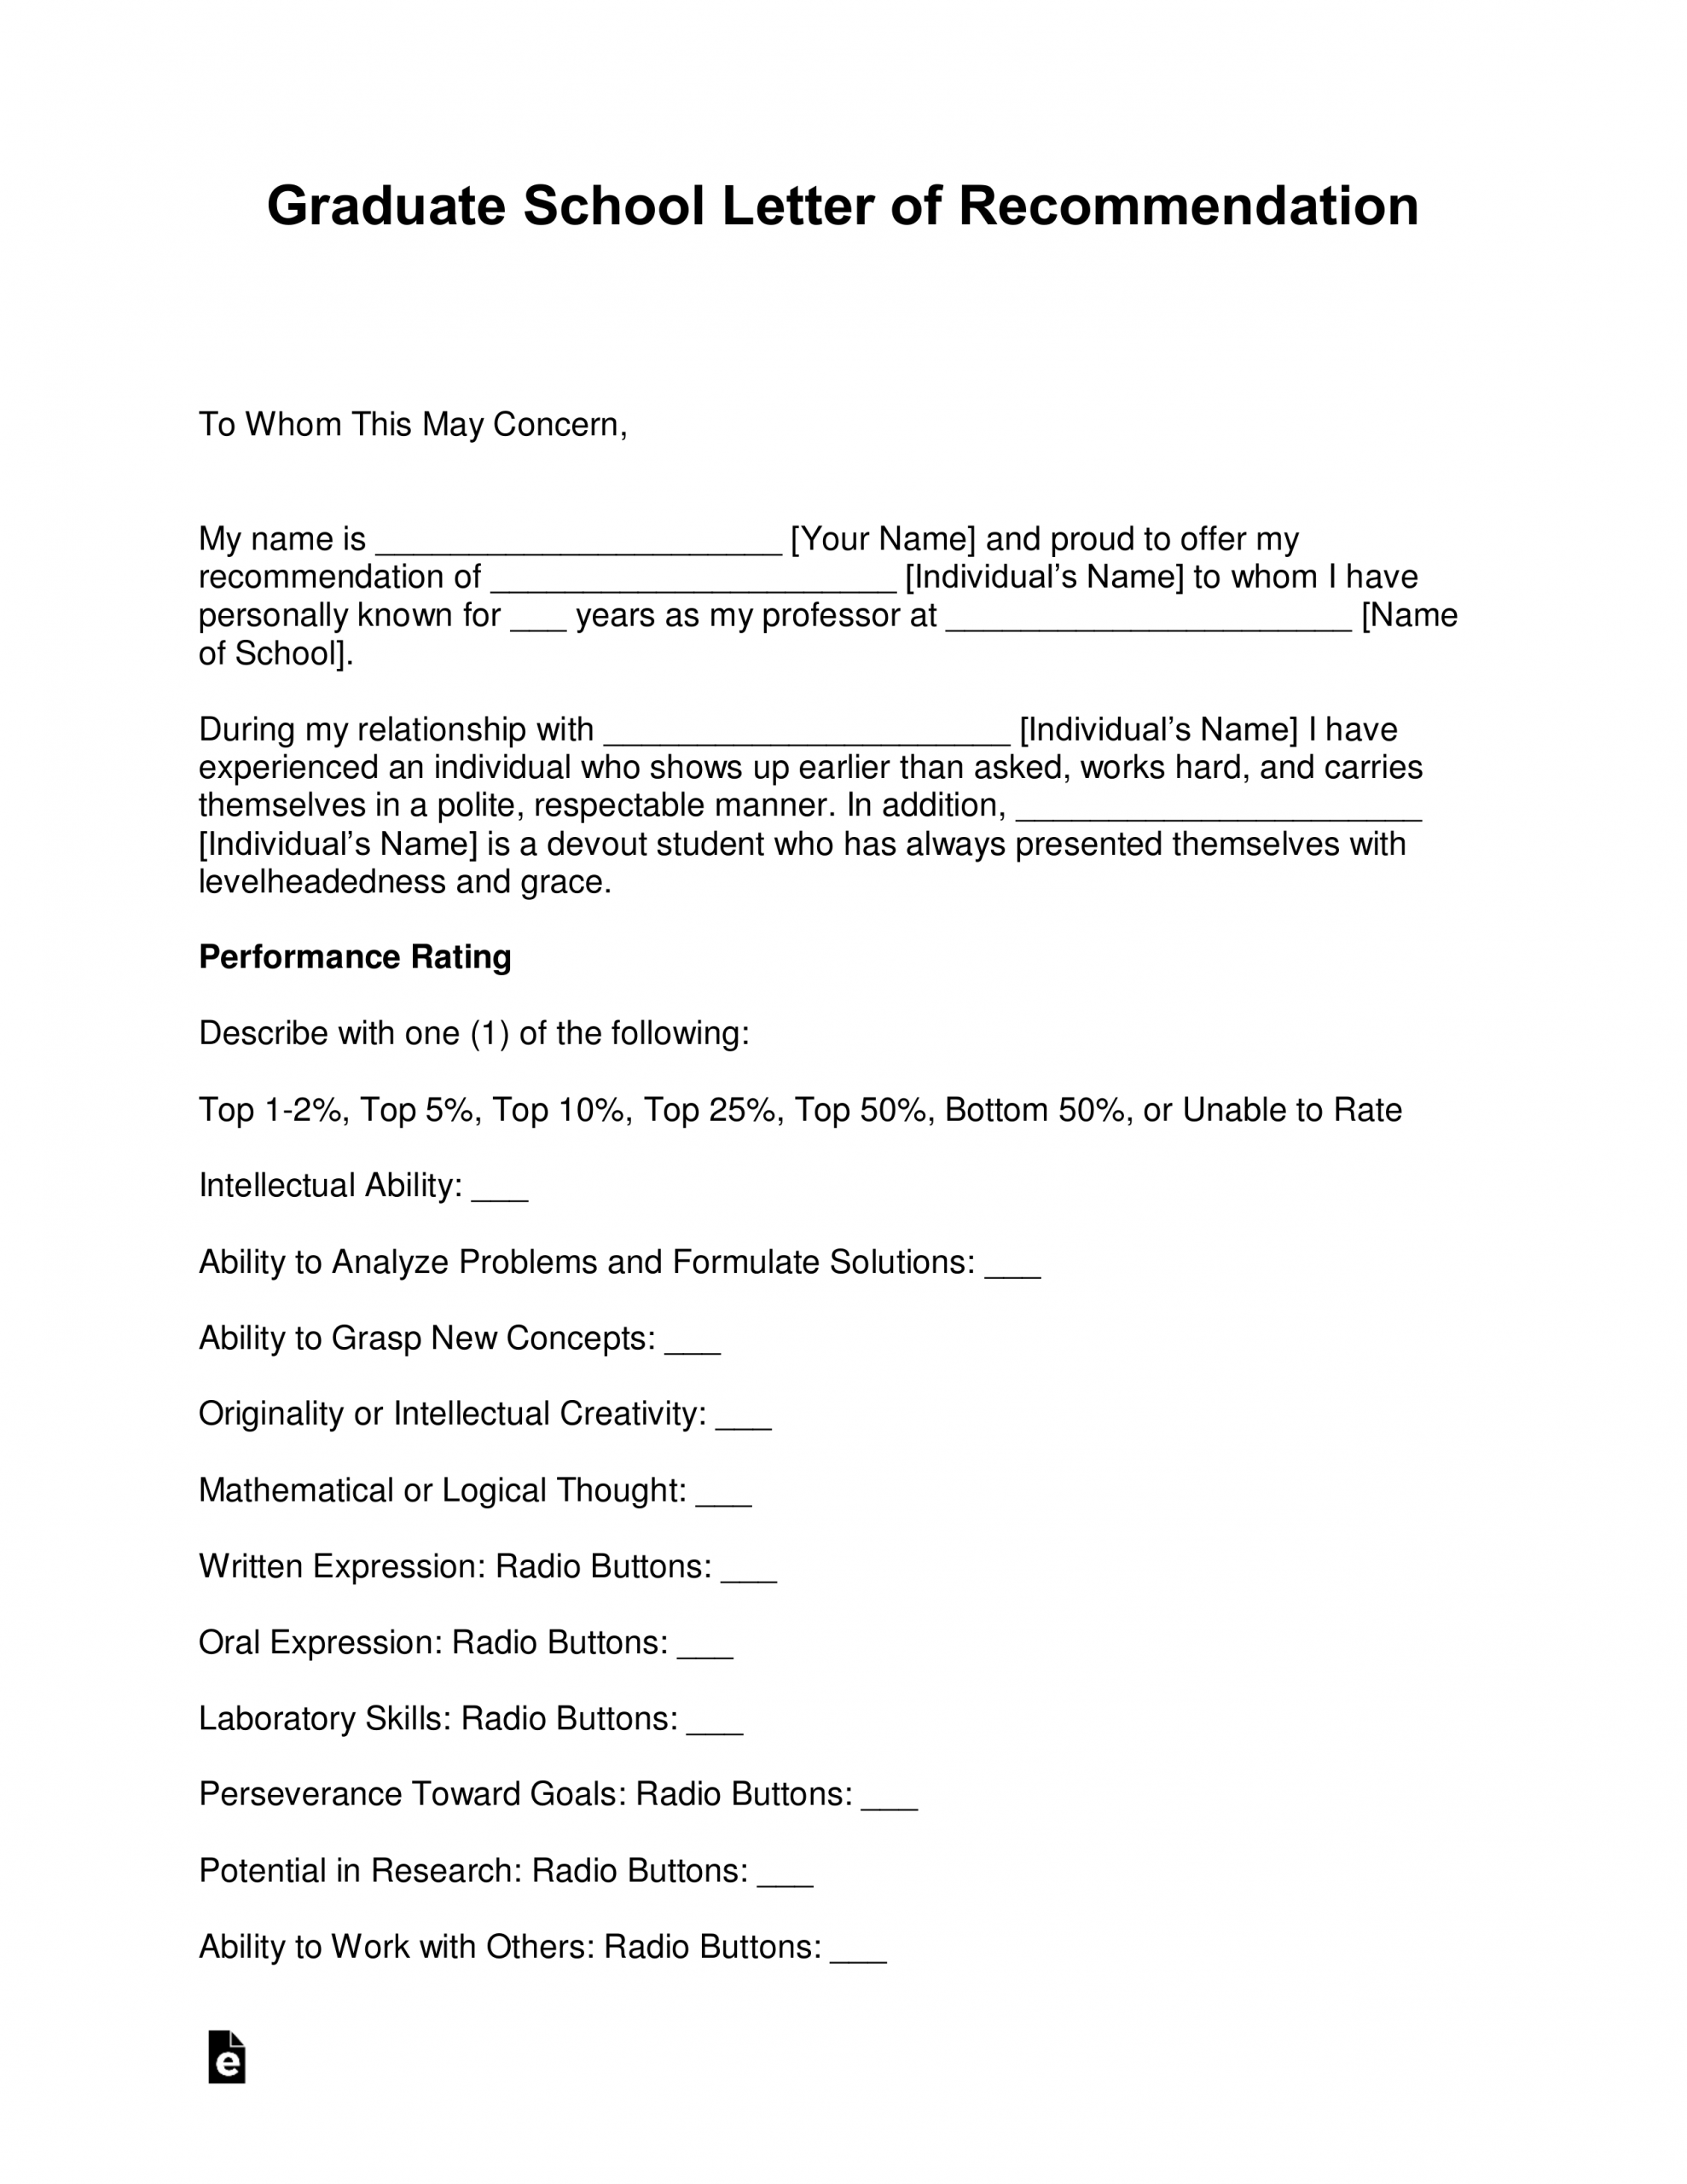 Free Graduate School Letter Of Recommendation Template inside dimensions 2550 X 3301